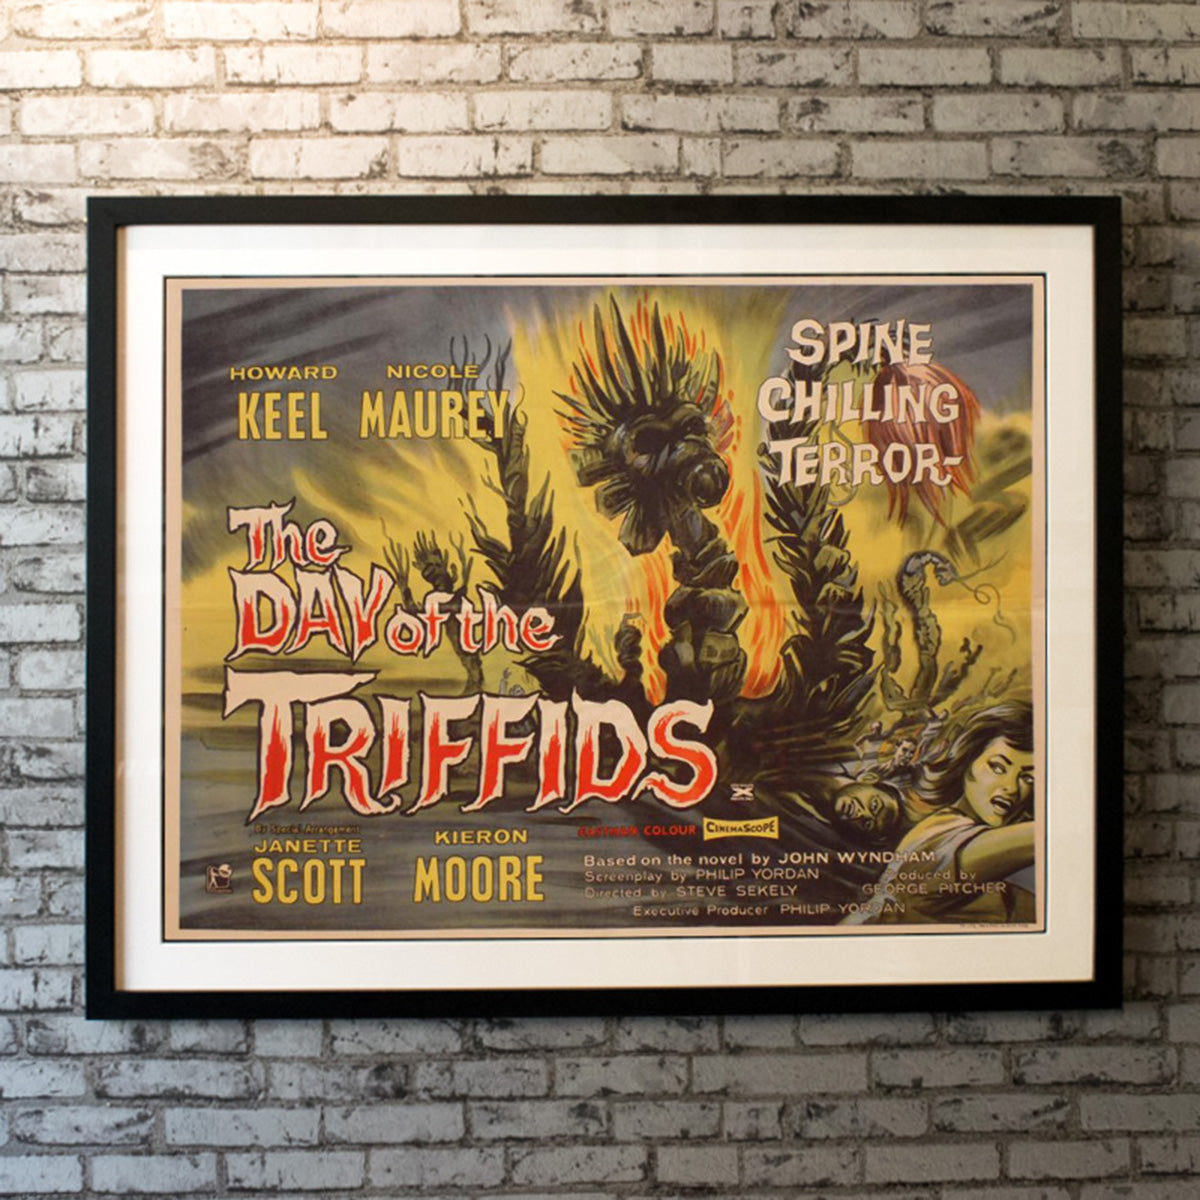 Original Movie Poster of Day Of The Triffids, The (1962)